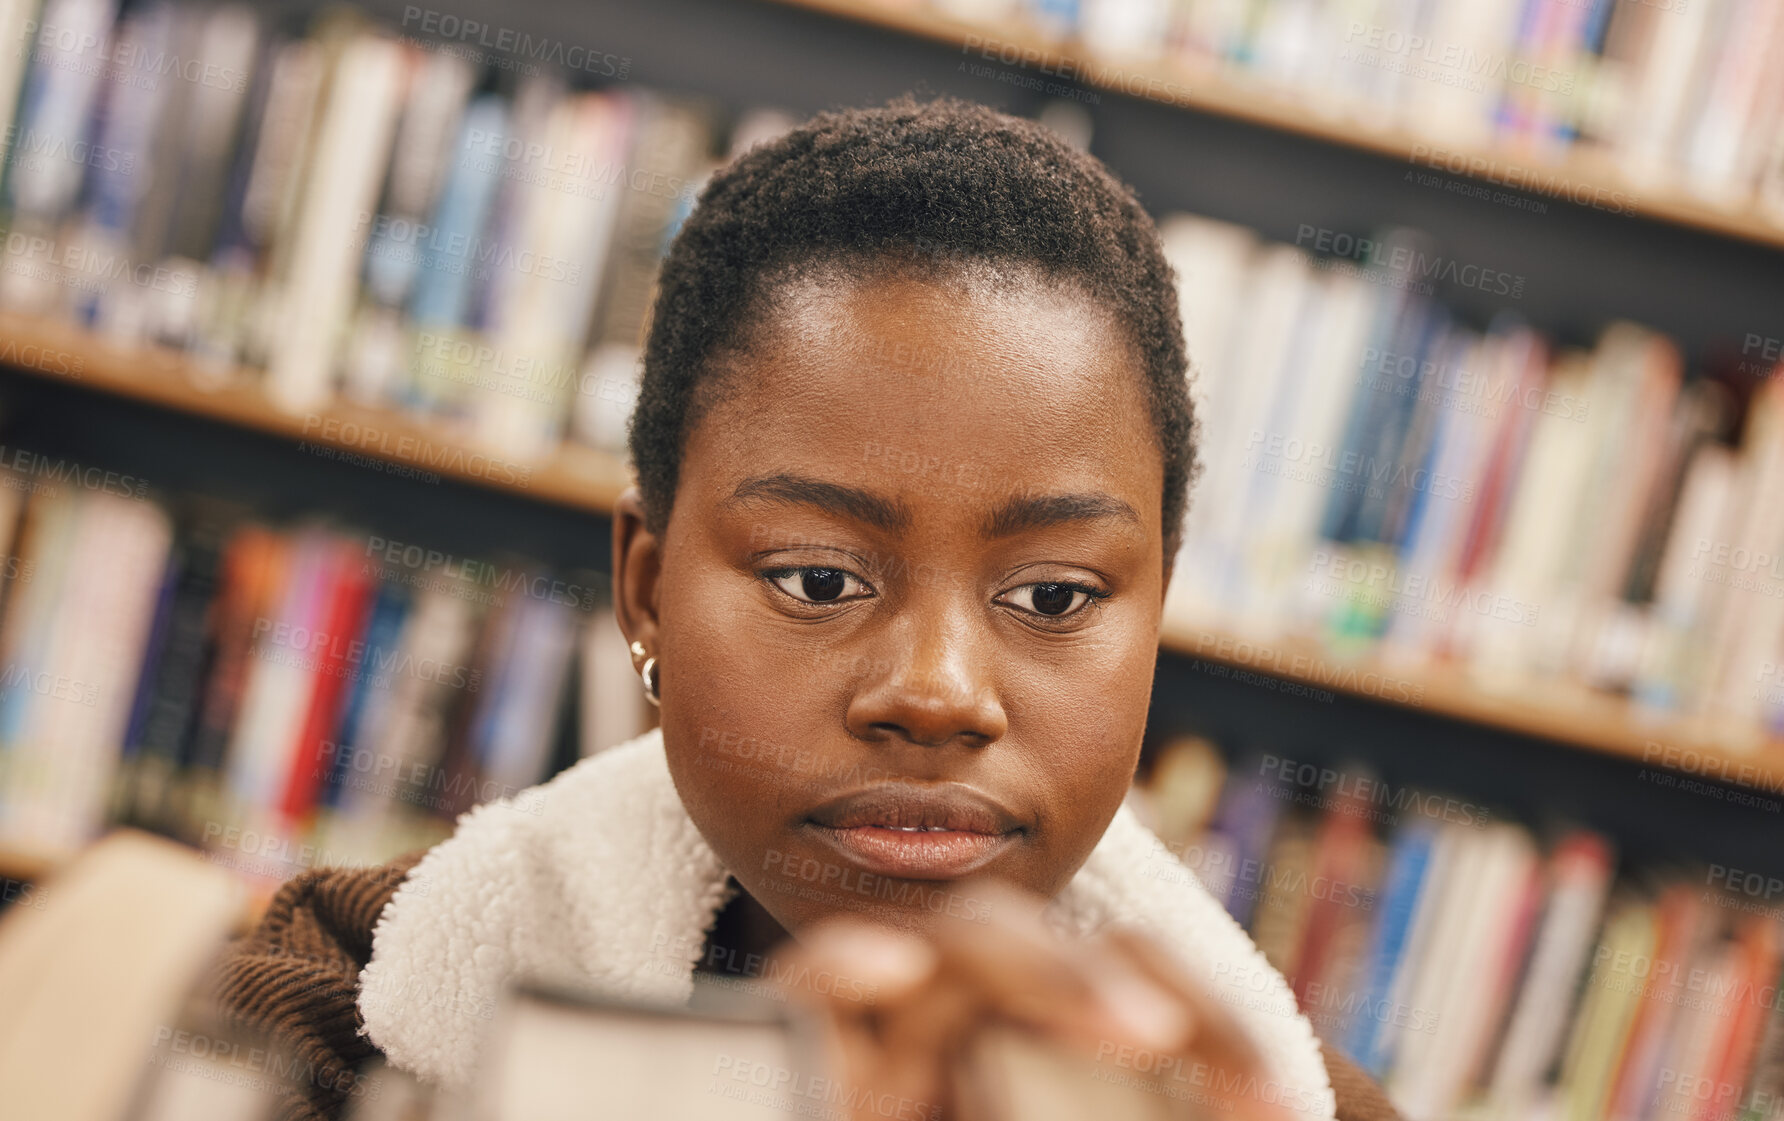 Buy stock photo Education, book search or black woman in library at college, university or school bookshelf for learning or studying. Research, scholarship or girl student focused on knowledge, goals or development